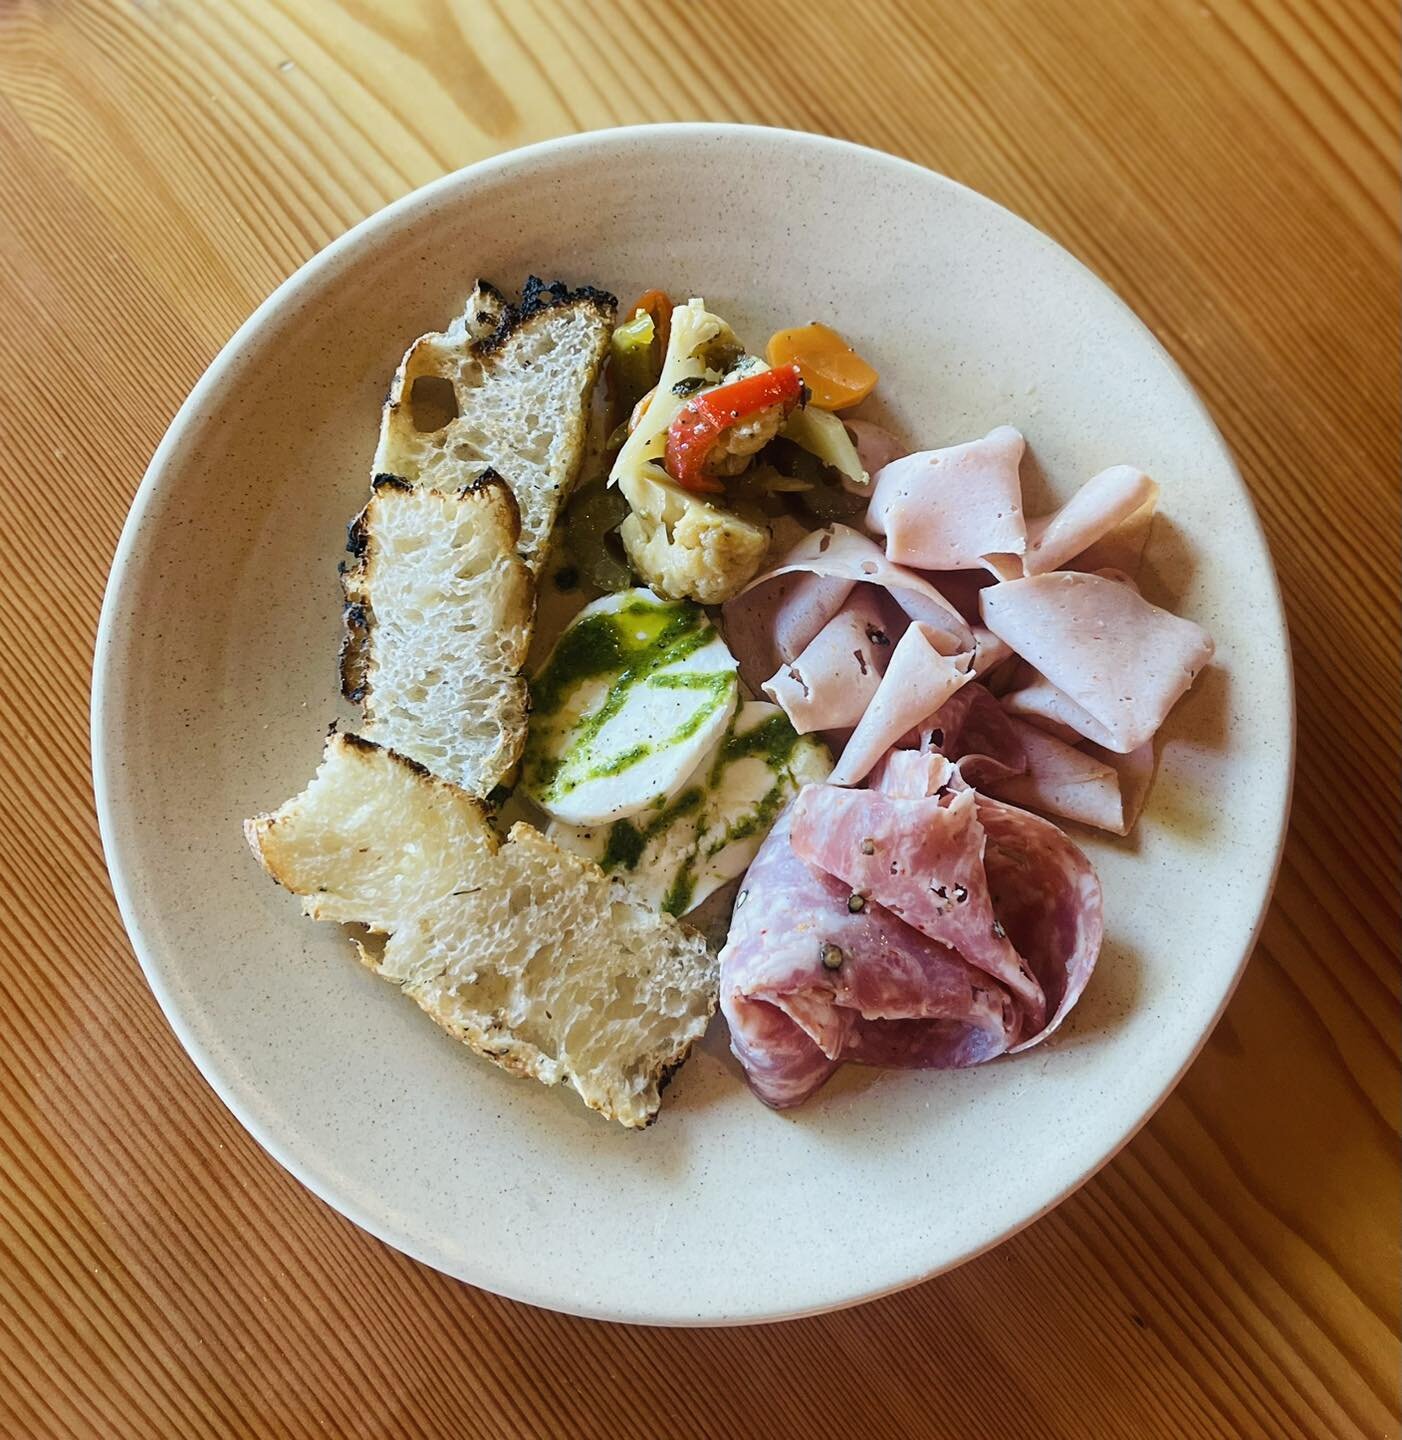 Our Antipasti special is the perfect afternoon snack or  start to a fantastic dinner! 

Salami, mortadella, fresh mozzarella with green garlic pesto, pickled vegetables and house focaccia crostinis. 

#patioweather #smallplates #italianinspired #sols